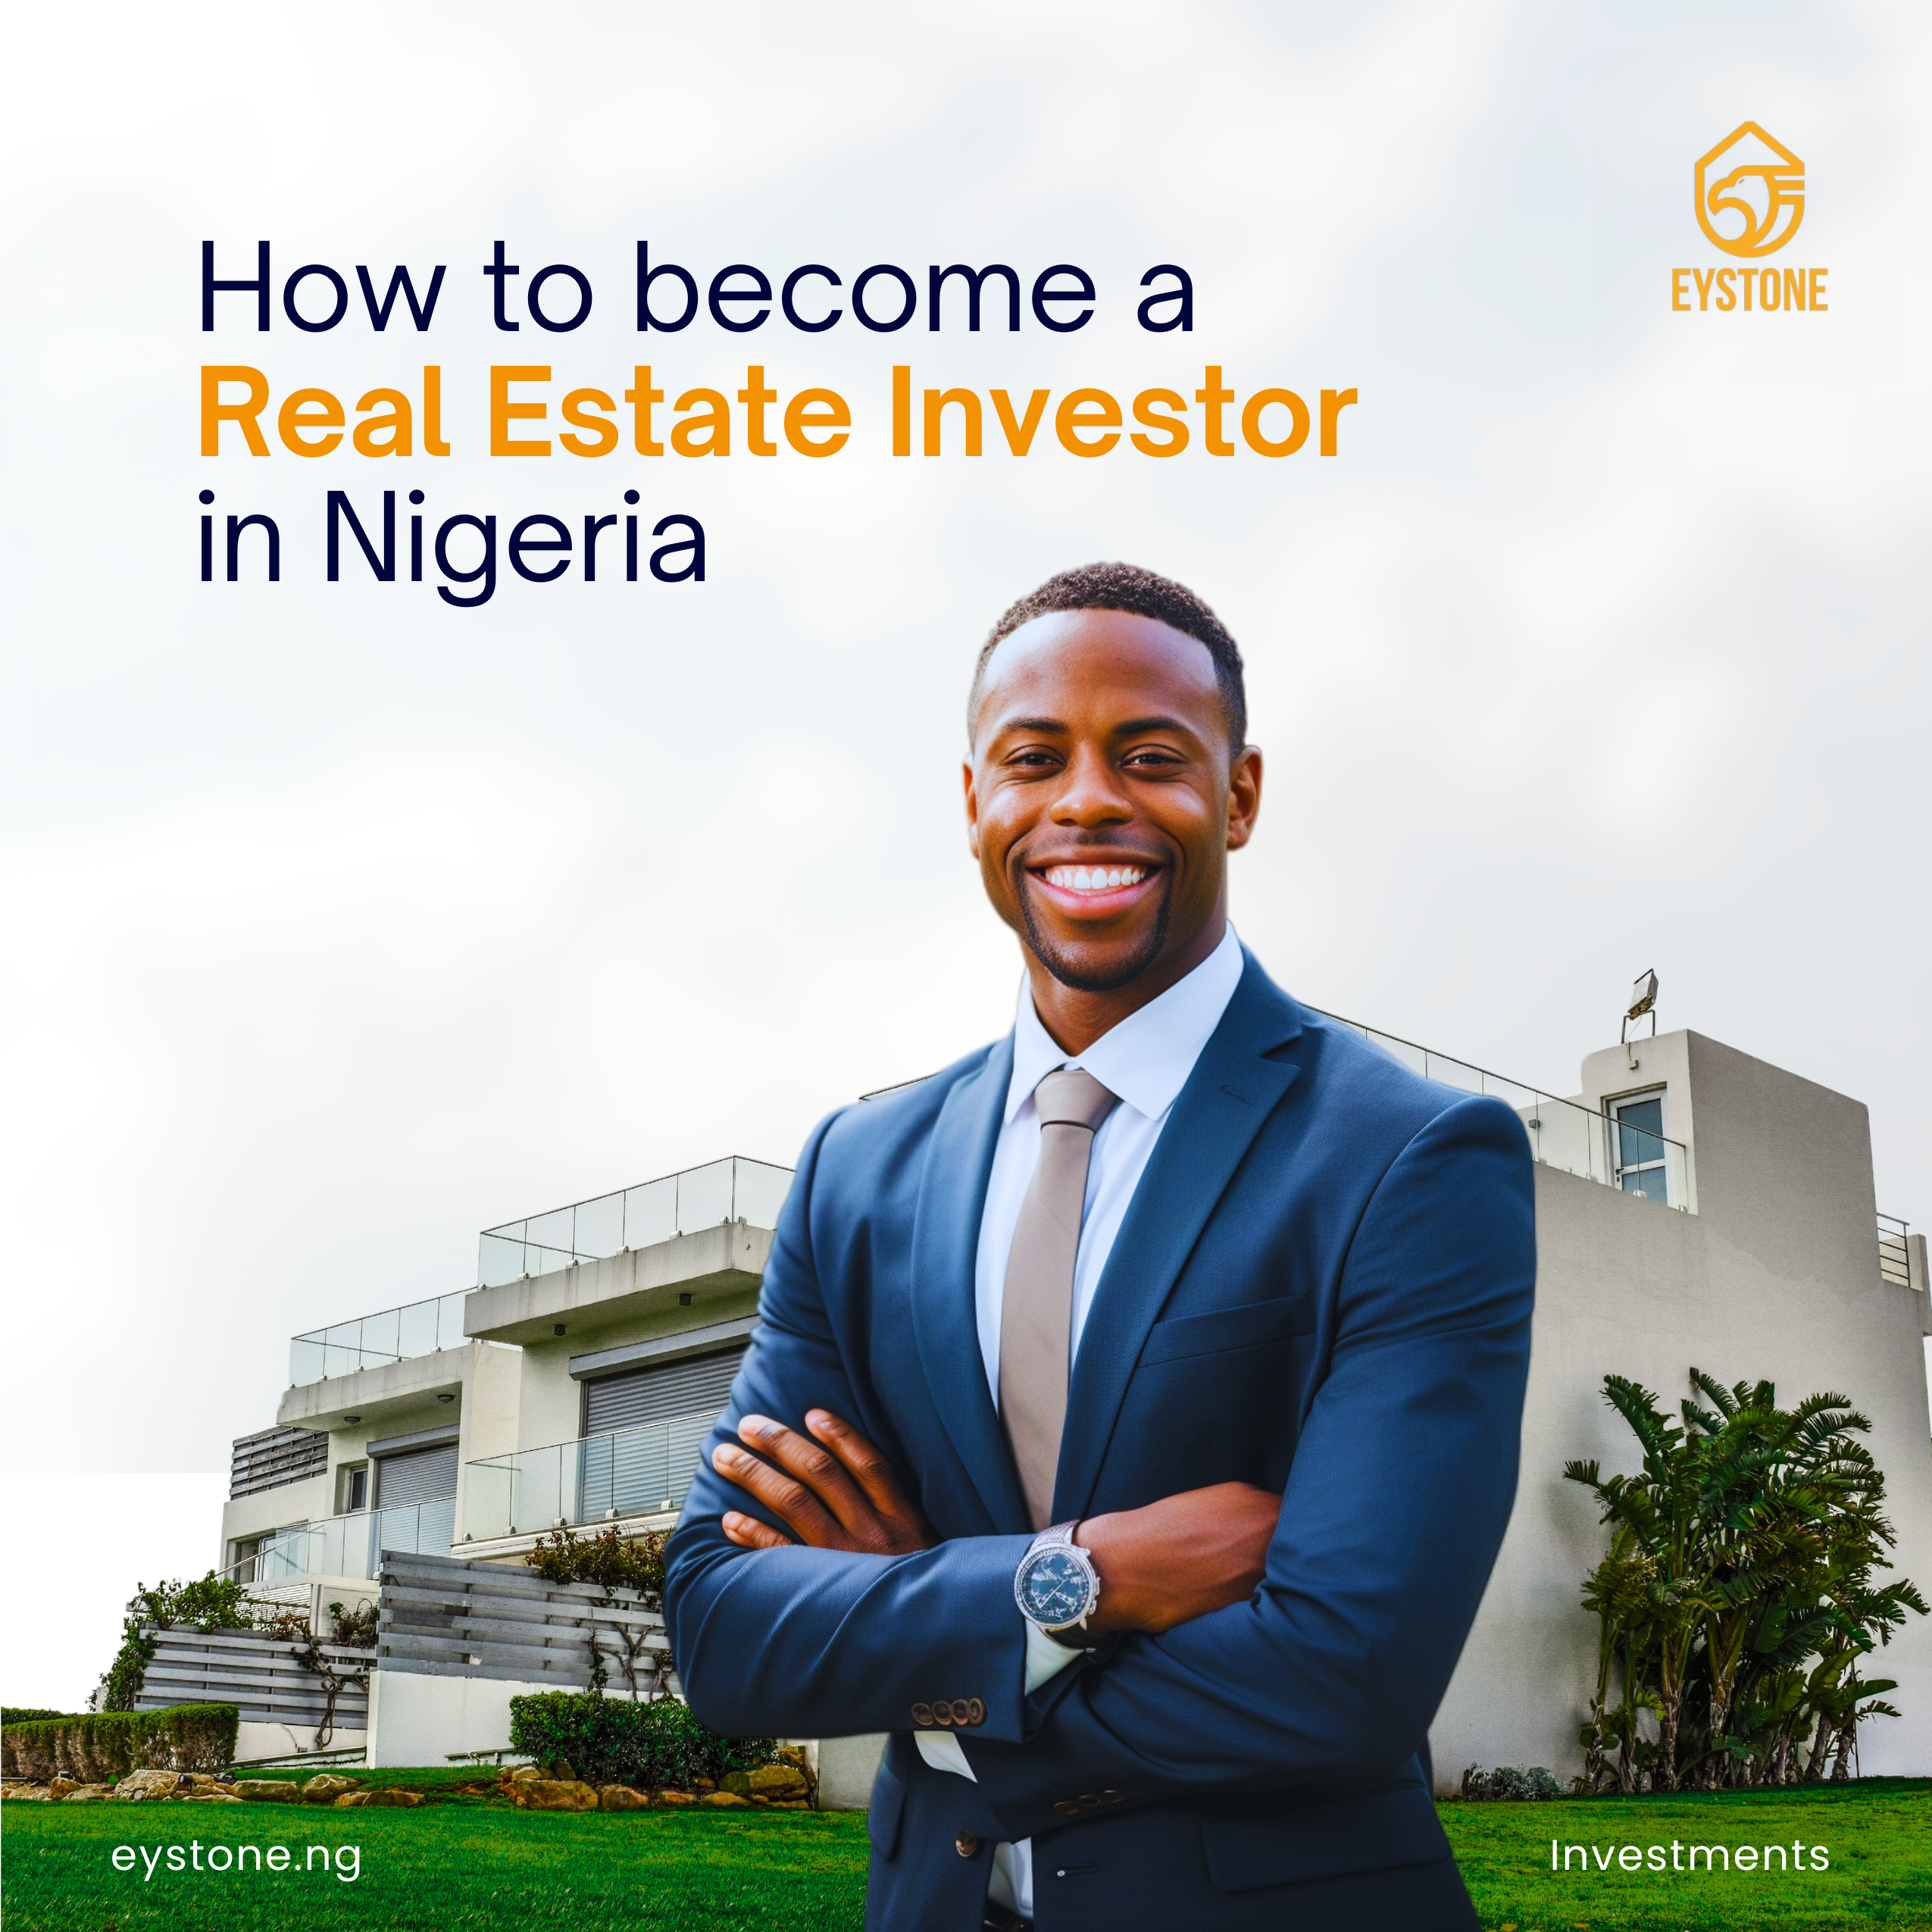 How to become a real estate investor in Nigeria